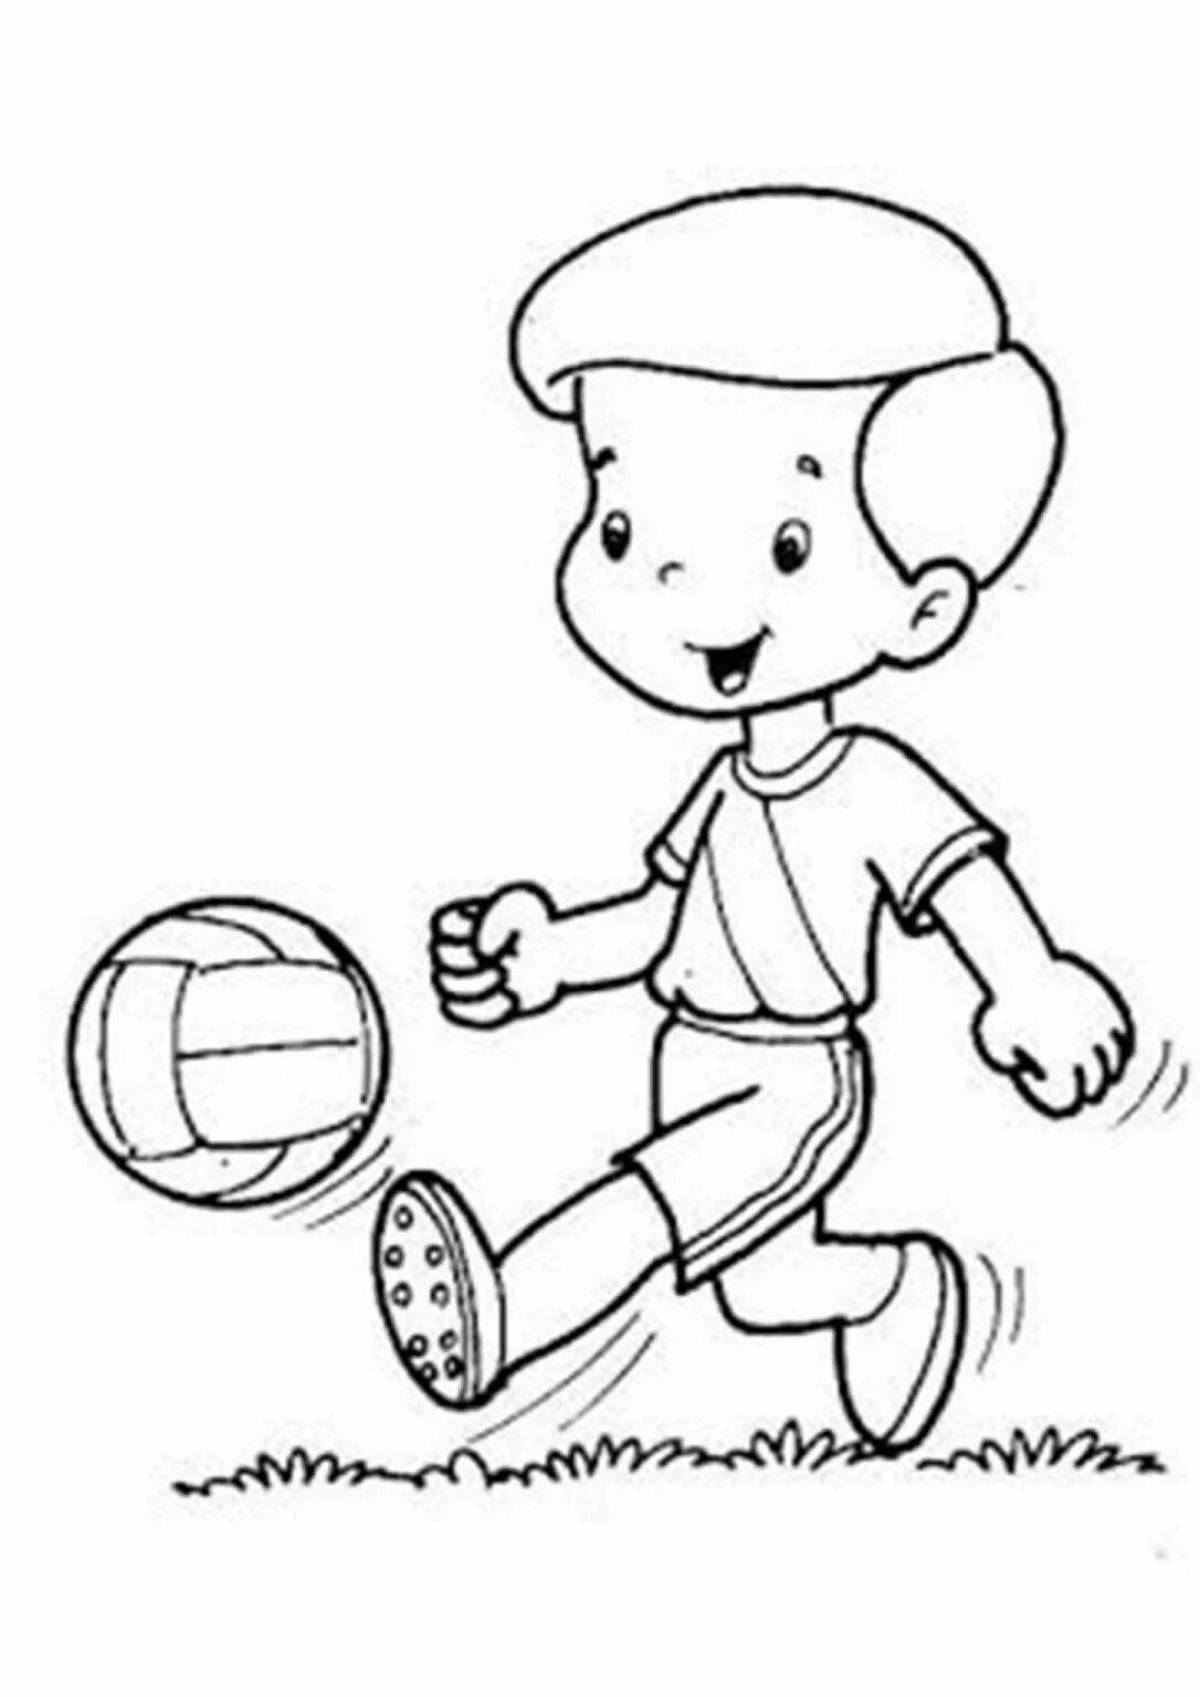 Attractive sports games coloring page